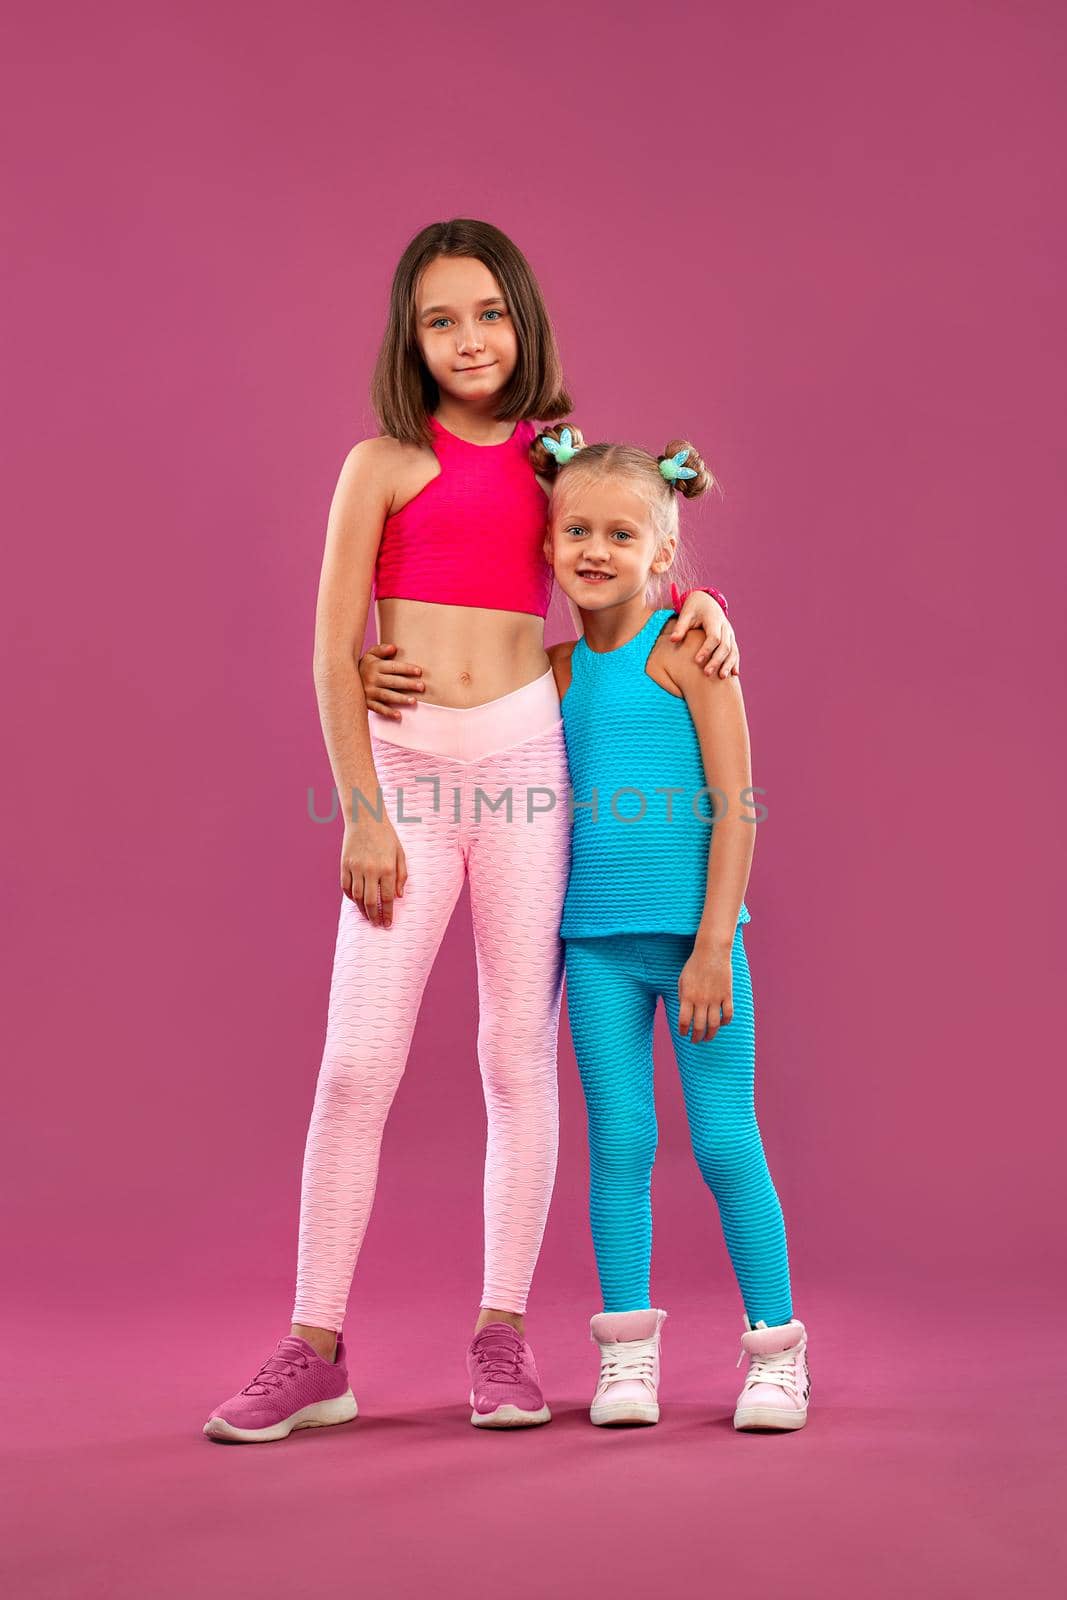 Two children girls rest after fitness exercises on a pink background. Kids lifestyle concept. by MikeOrlov